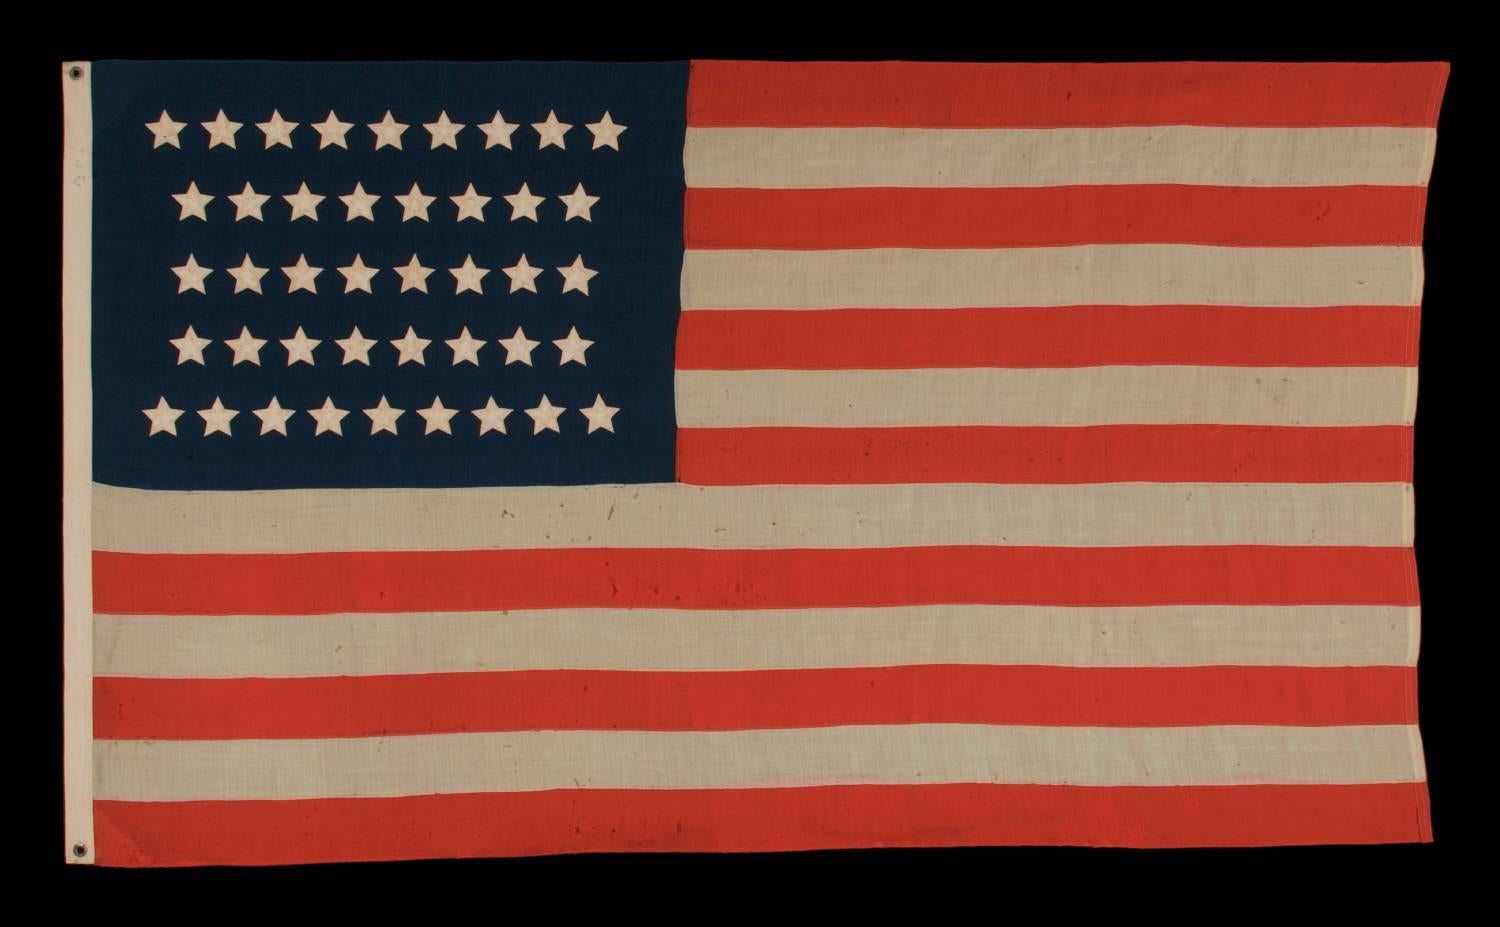 42 STARS IN AN HOURGLASS PATTERN ON AN ANTIQUE AMERICAN FLAG, AN UNOFFICIAL STAR COUNT, WASHINGTON STATEHOOD, 1889-1890:

Early American national flag with 42 stars, configured in rows of 8-7-7-7-7-8. Note how the top and bottom rows offset in such